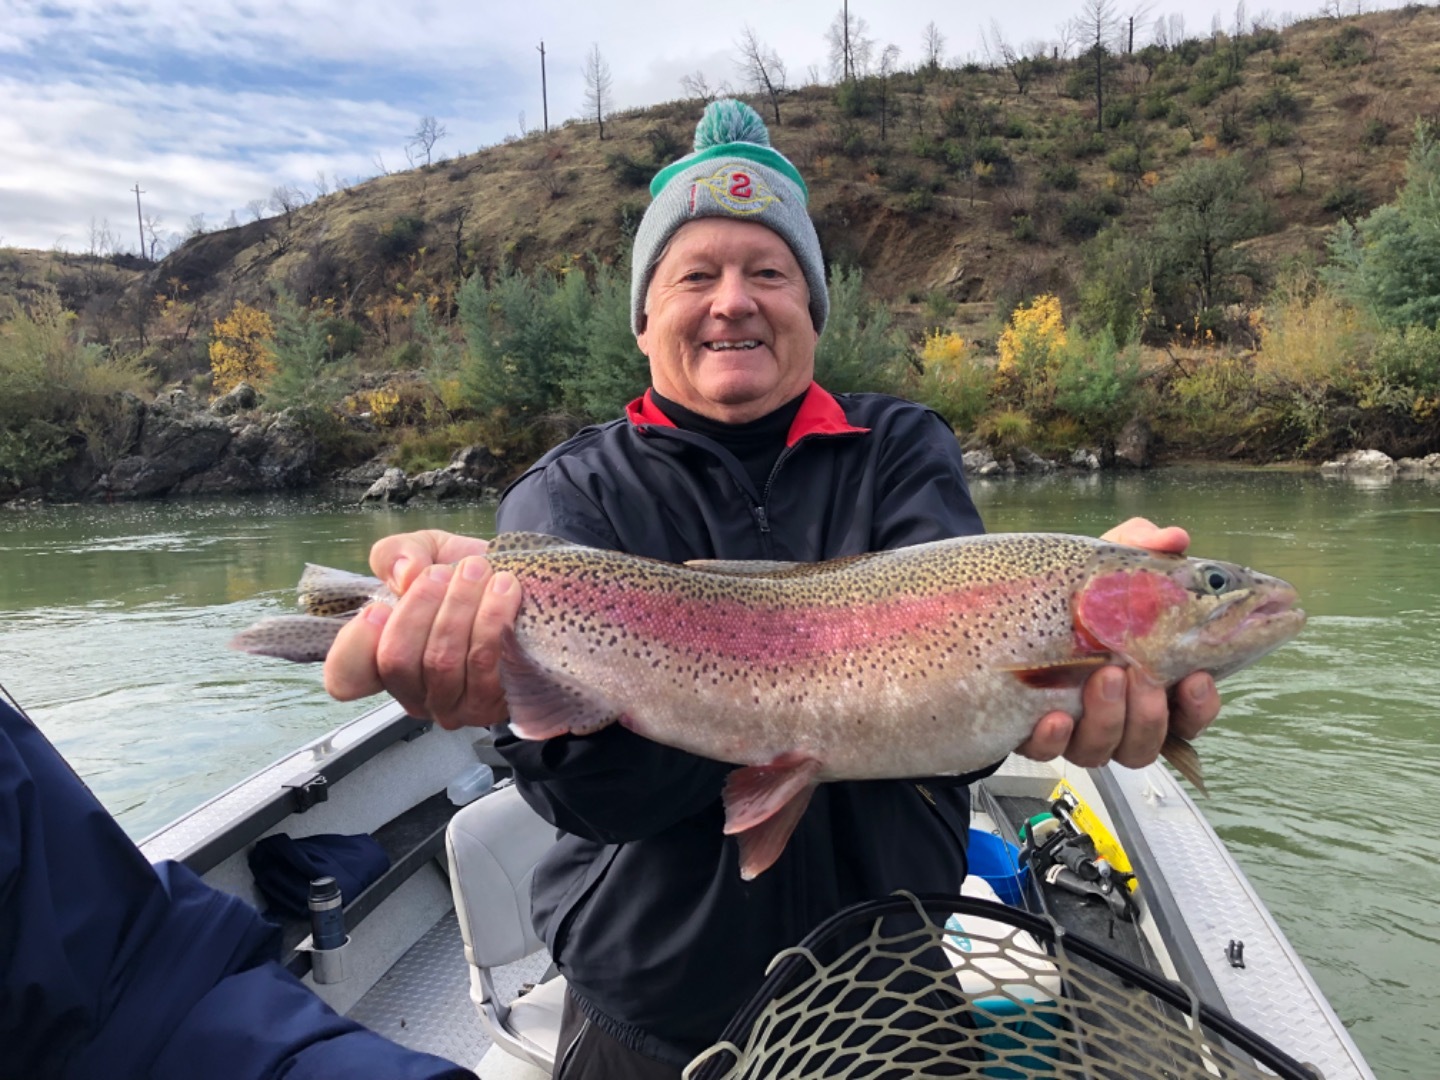 Giant Trout and Steelhead on the bite .